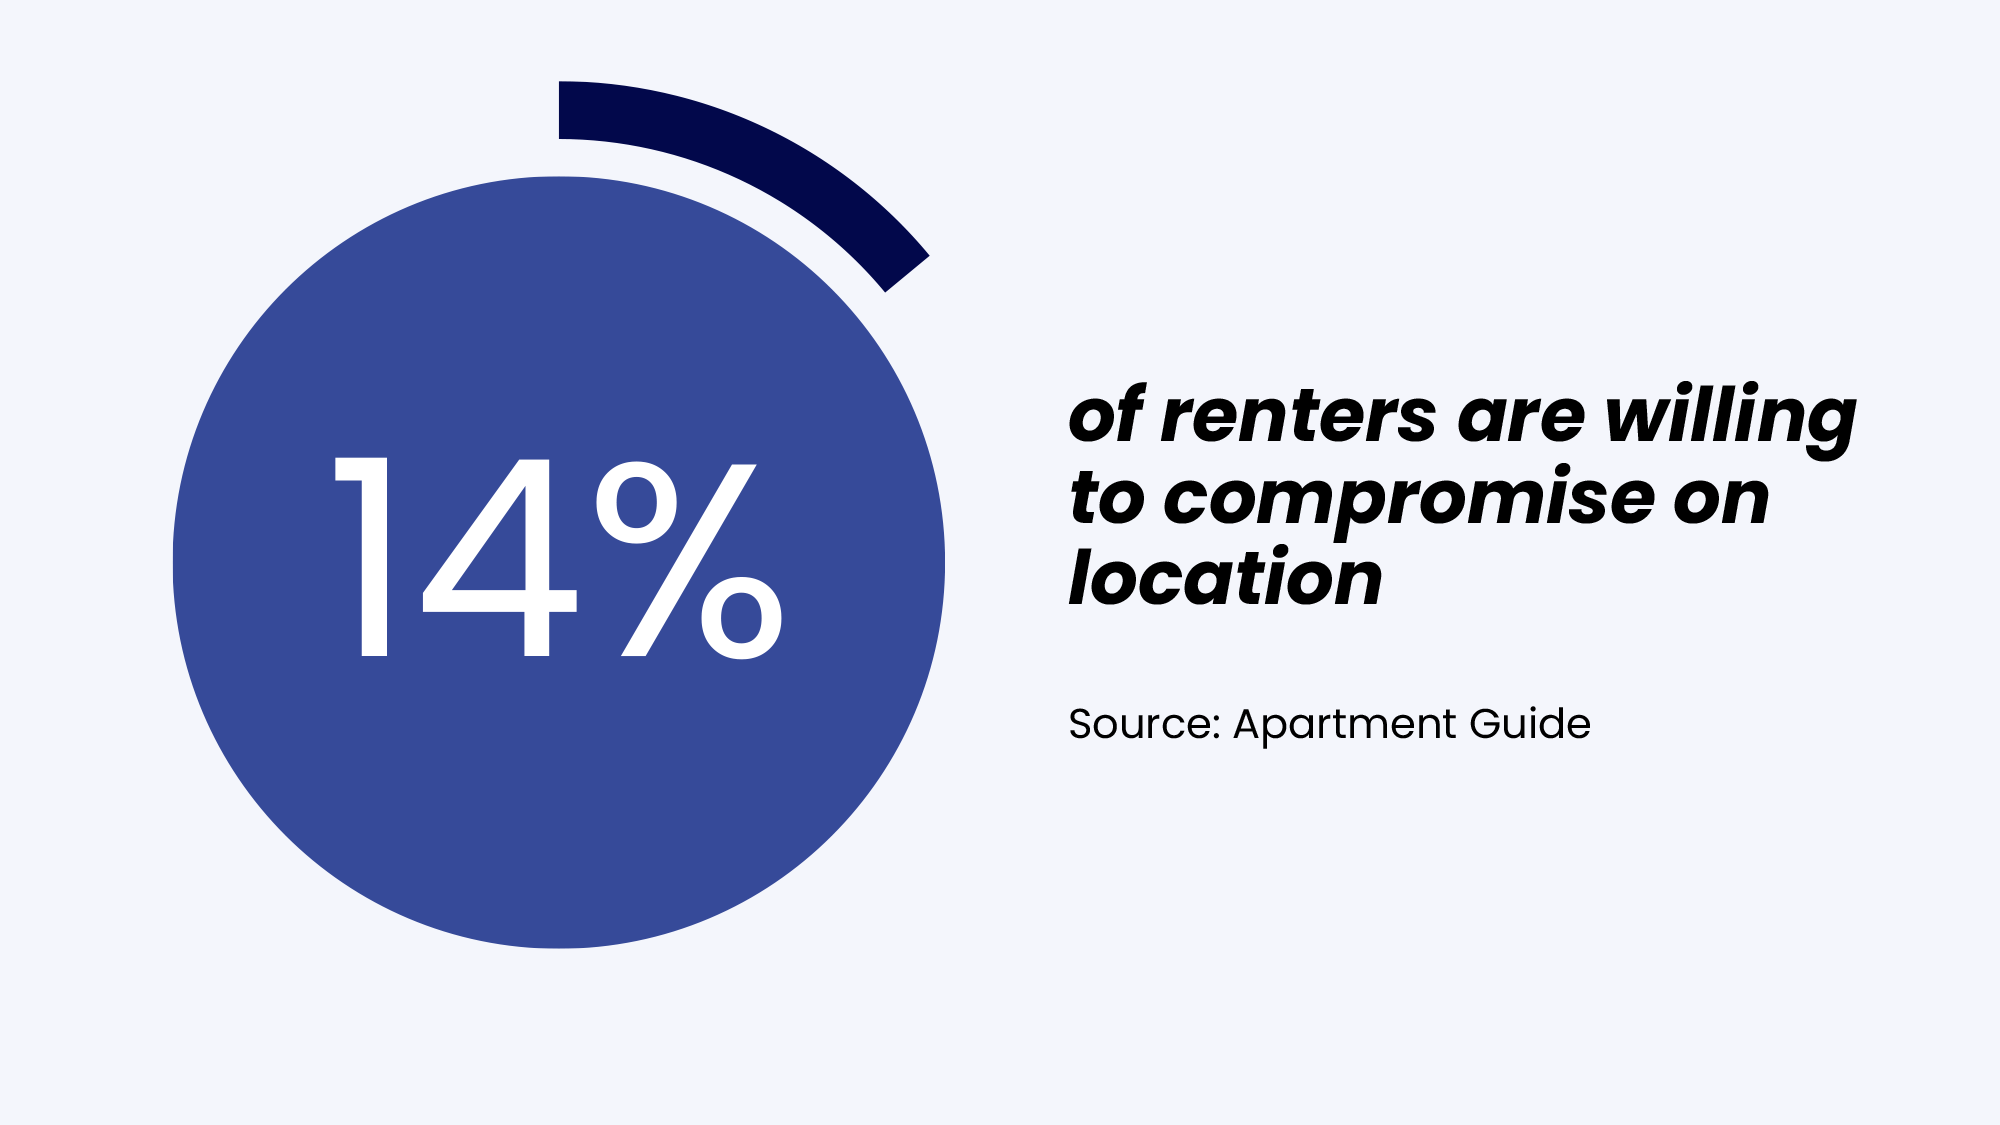 14% of renters are willing to compromise on location